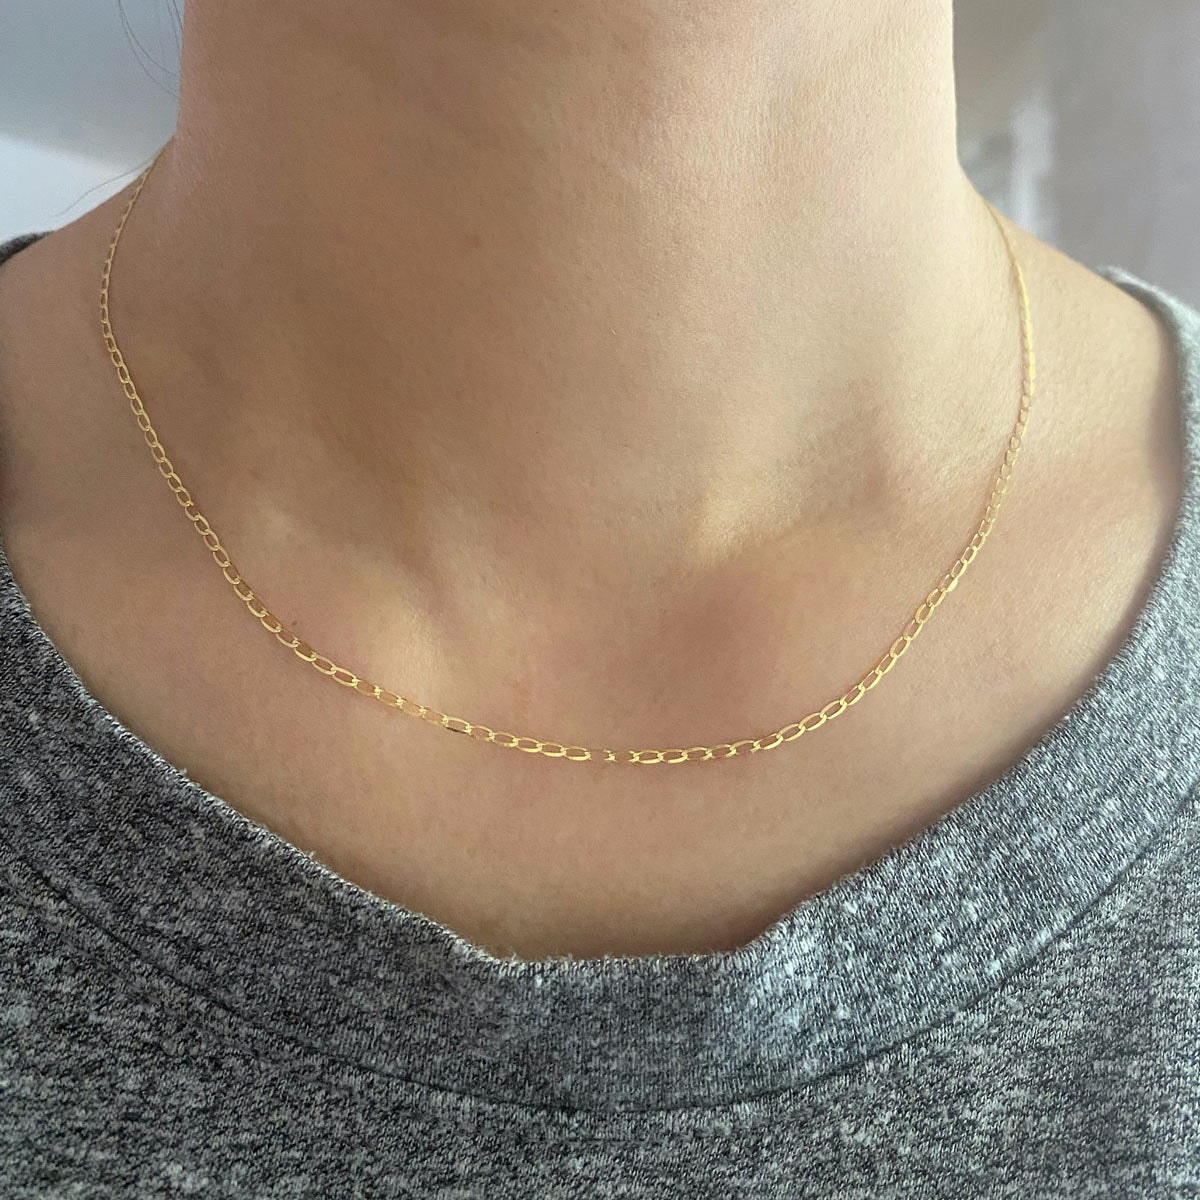 Dcfywl731 Gold Chunky Necklaces Hip Hop Necklace Cuban Link Chain for Men  Boys Large Gold Necklace for Women Girls 80s 90s Retro Necklace Jewelry  Gift | Amazon.com